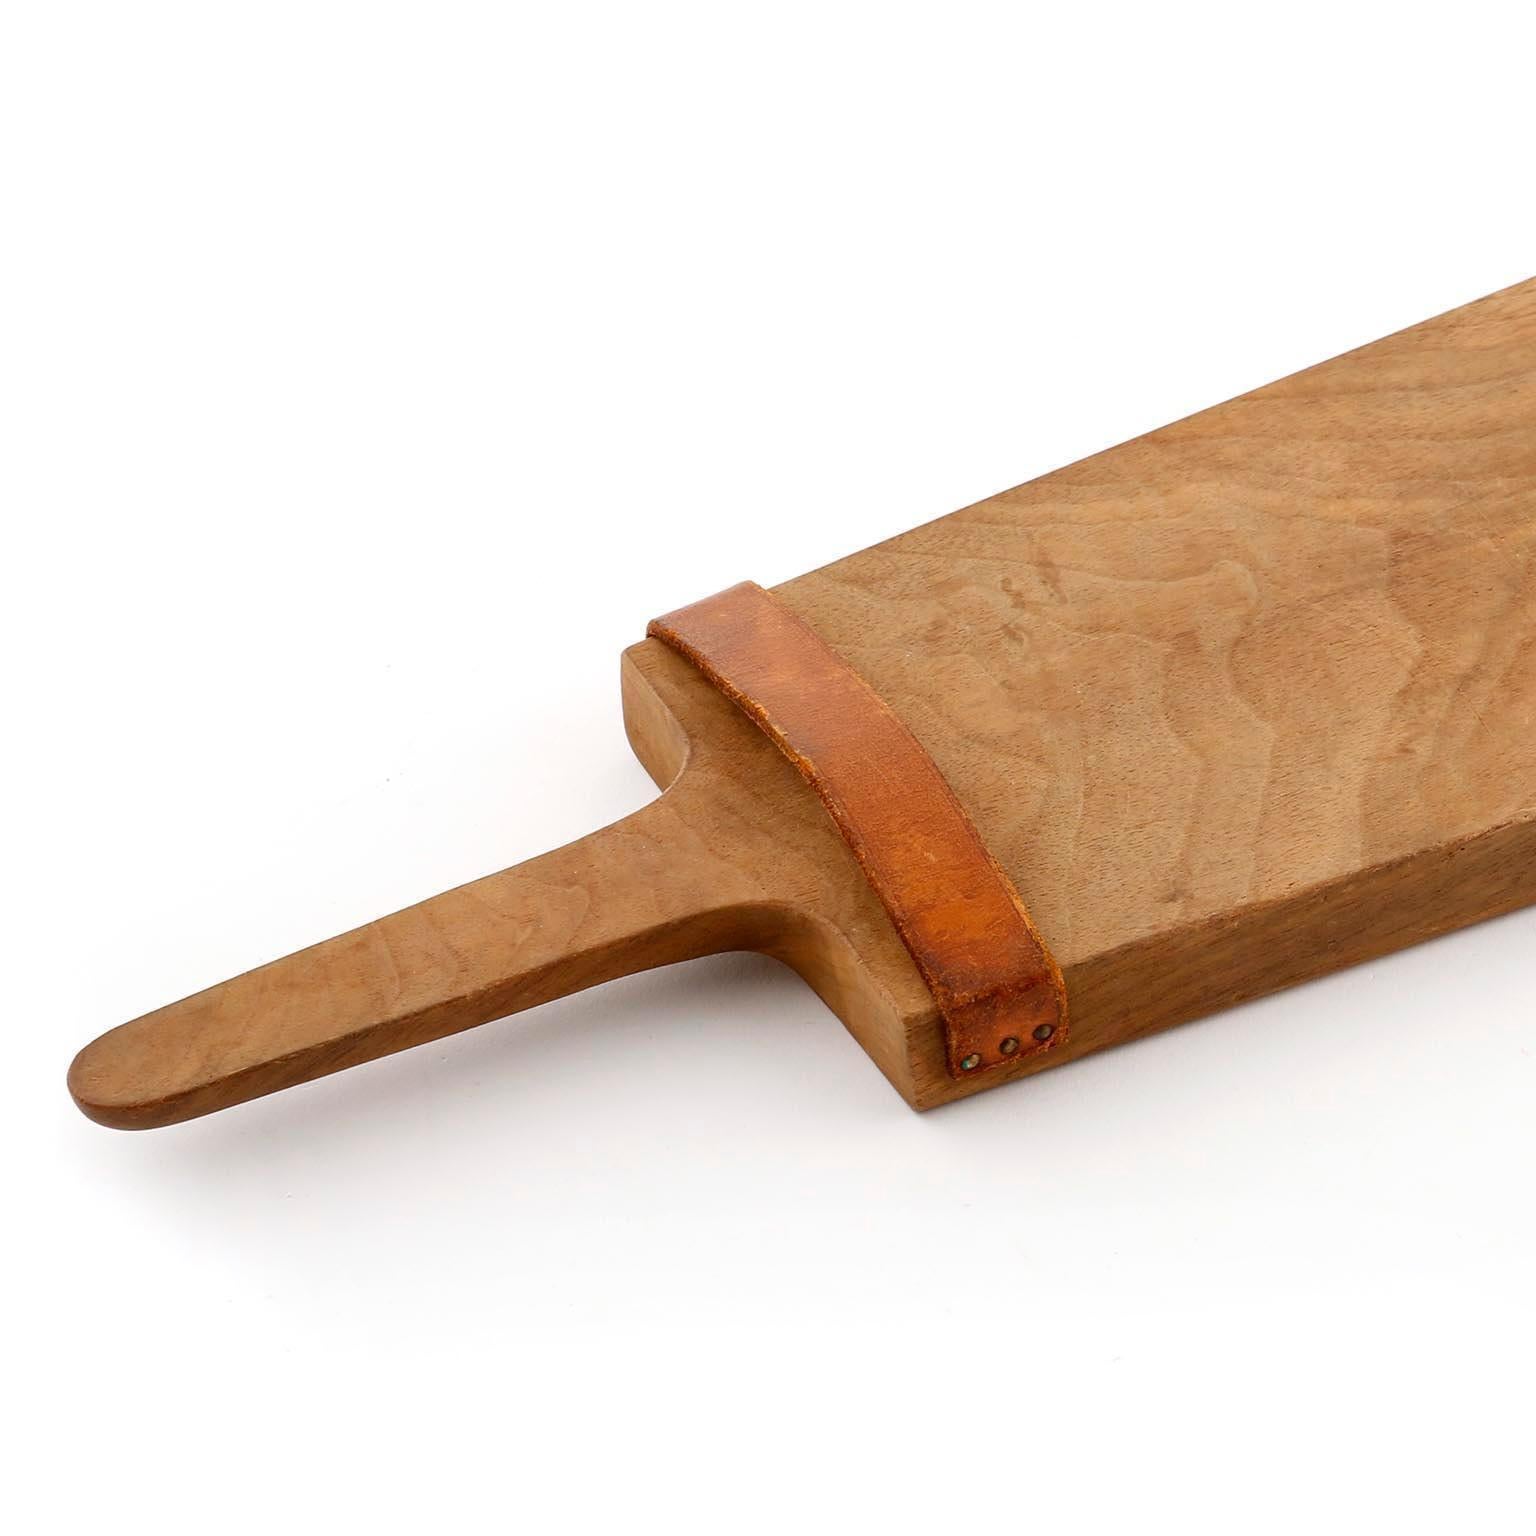 Mid-20th Century Carl Auböck Knife Cutting Chopping Board, Wood Wicker Stainless Steel, 1950s